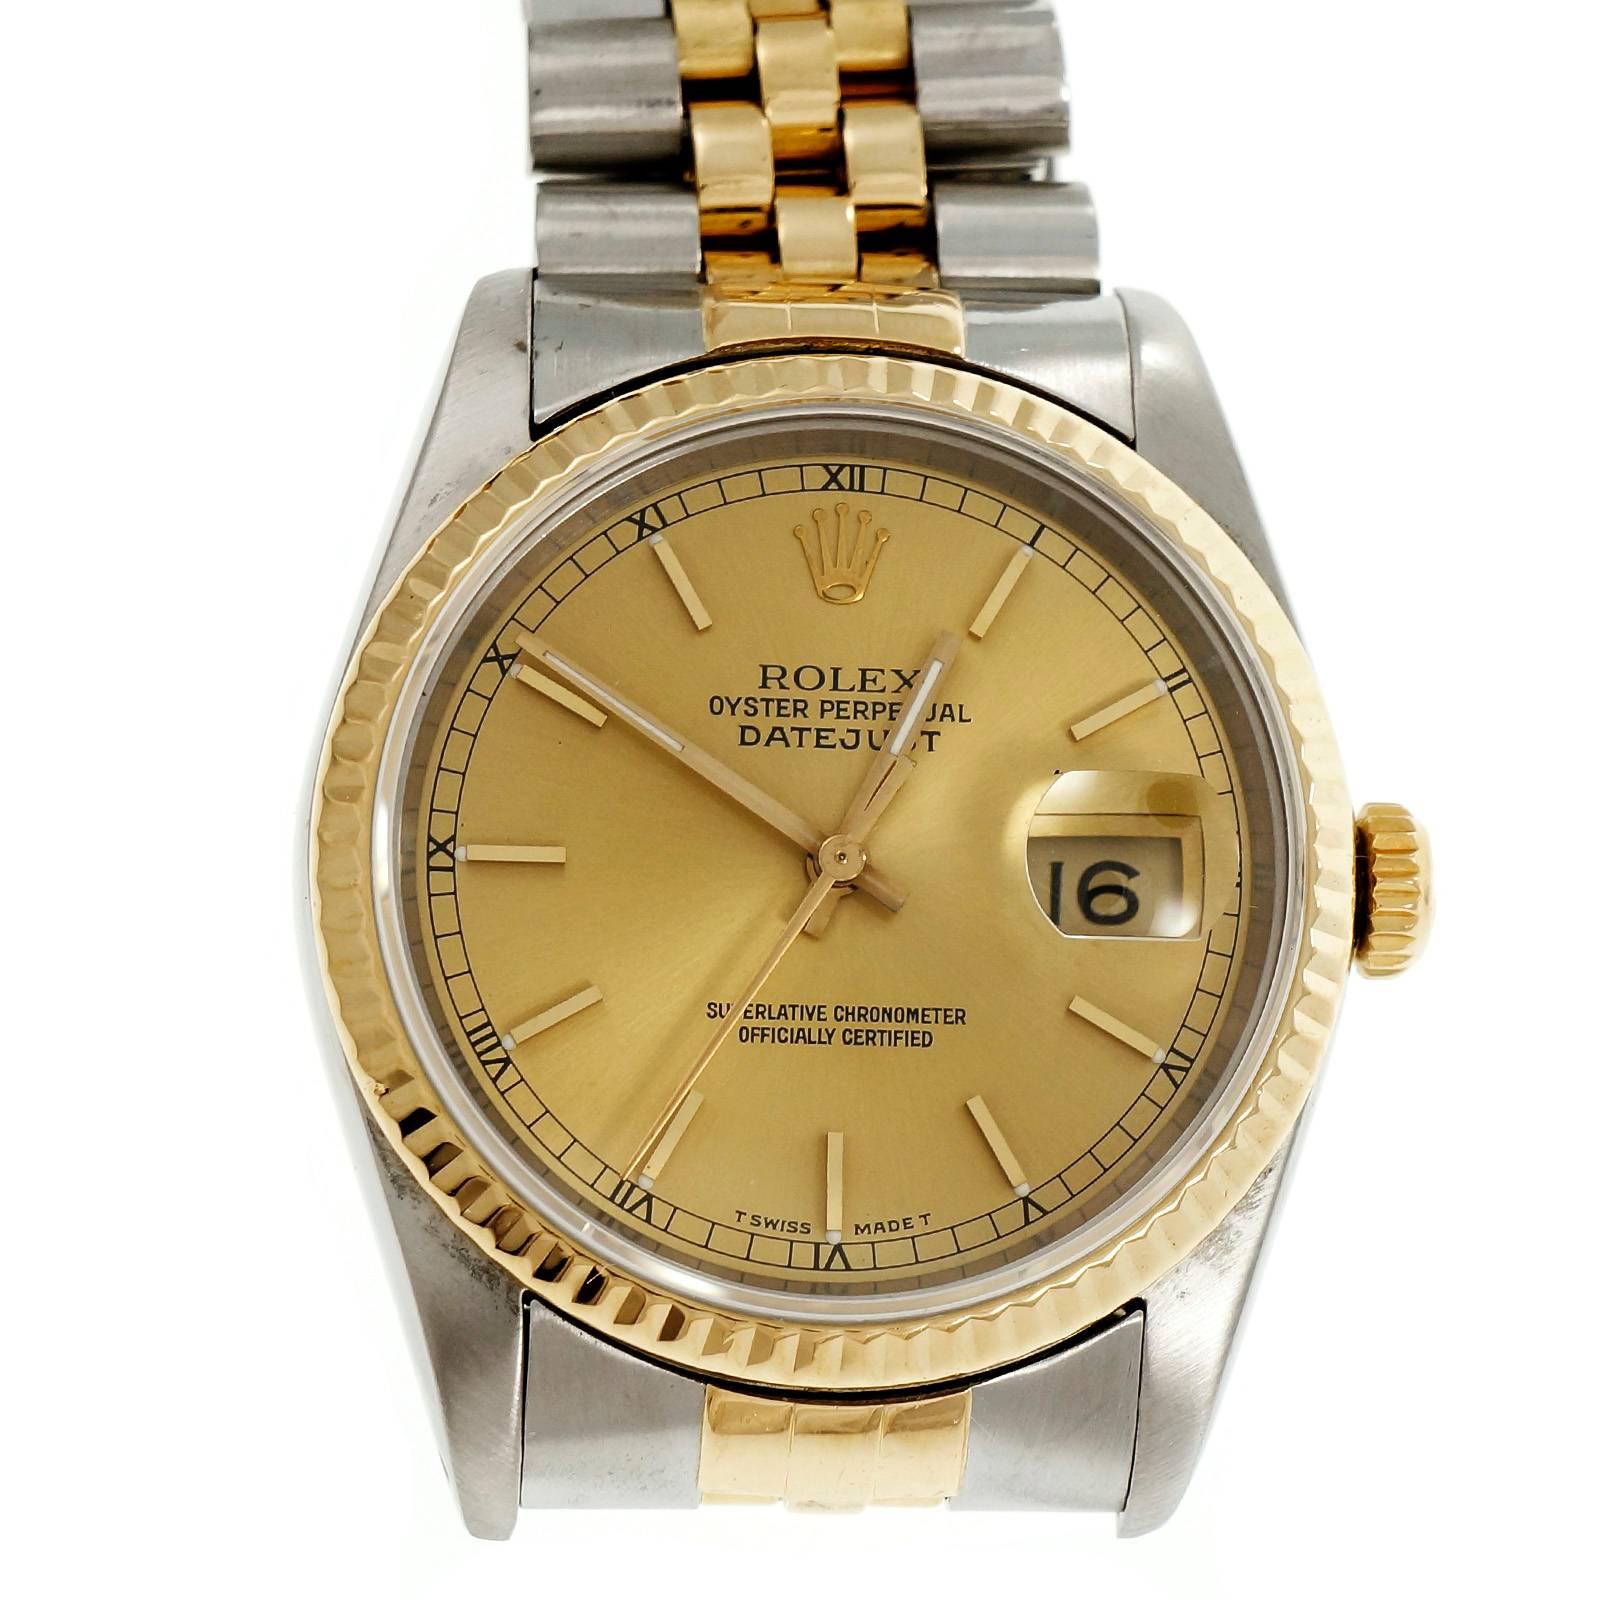 Rolex Datejust Automatic wristwatch. Original 18k gold and steel. Sapphire crystal and Jubilee band. Circa 1990s.

18k Yellow gold & Steel
104.6 grams
Band length: 8 3/8 inches
Length: 43.2mm
Width: 36mm
Band width at case: 20mm
Case